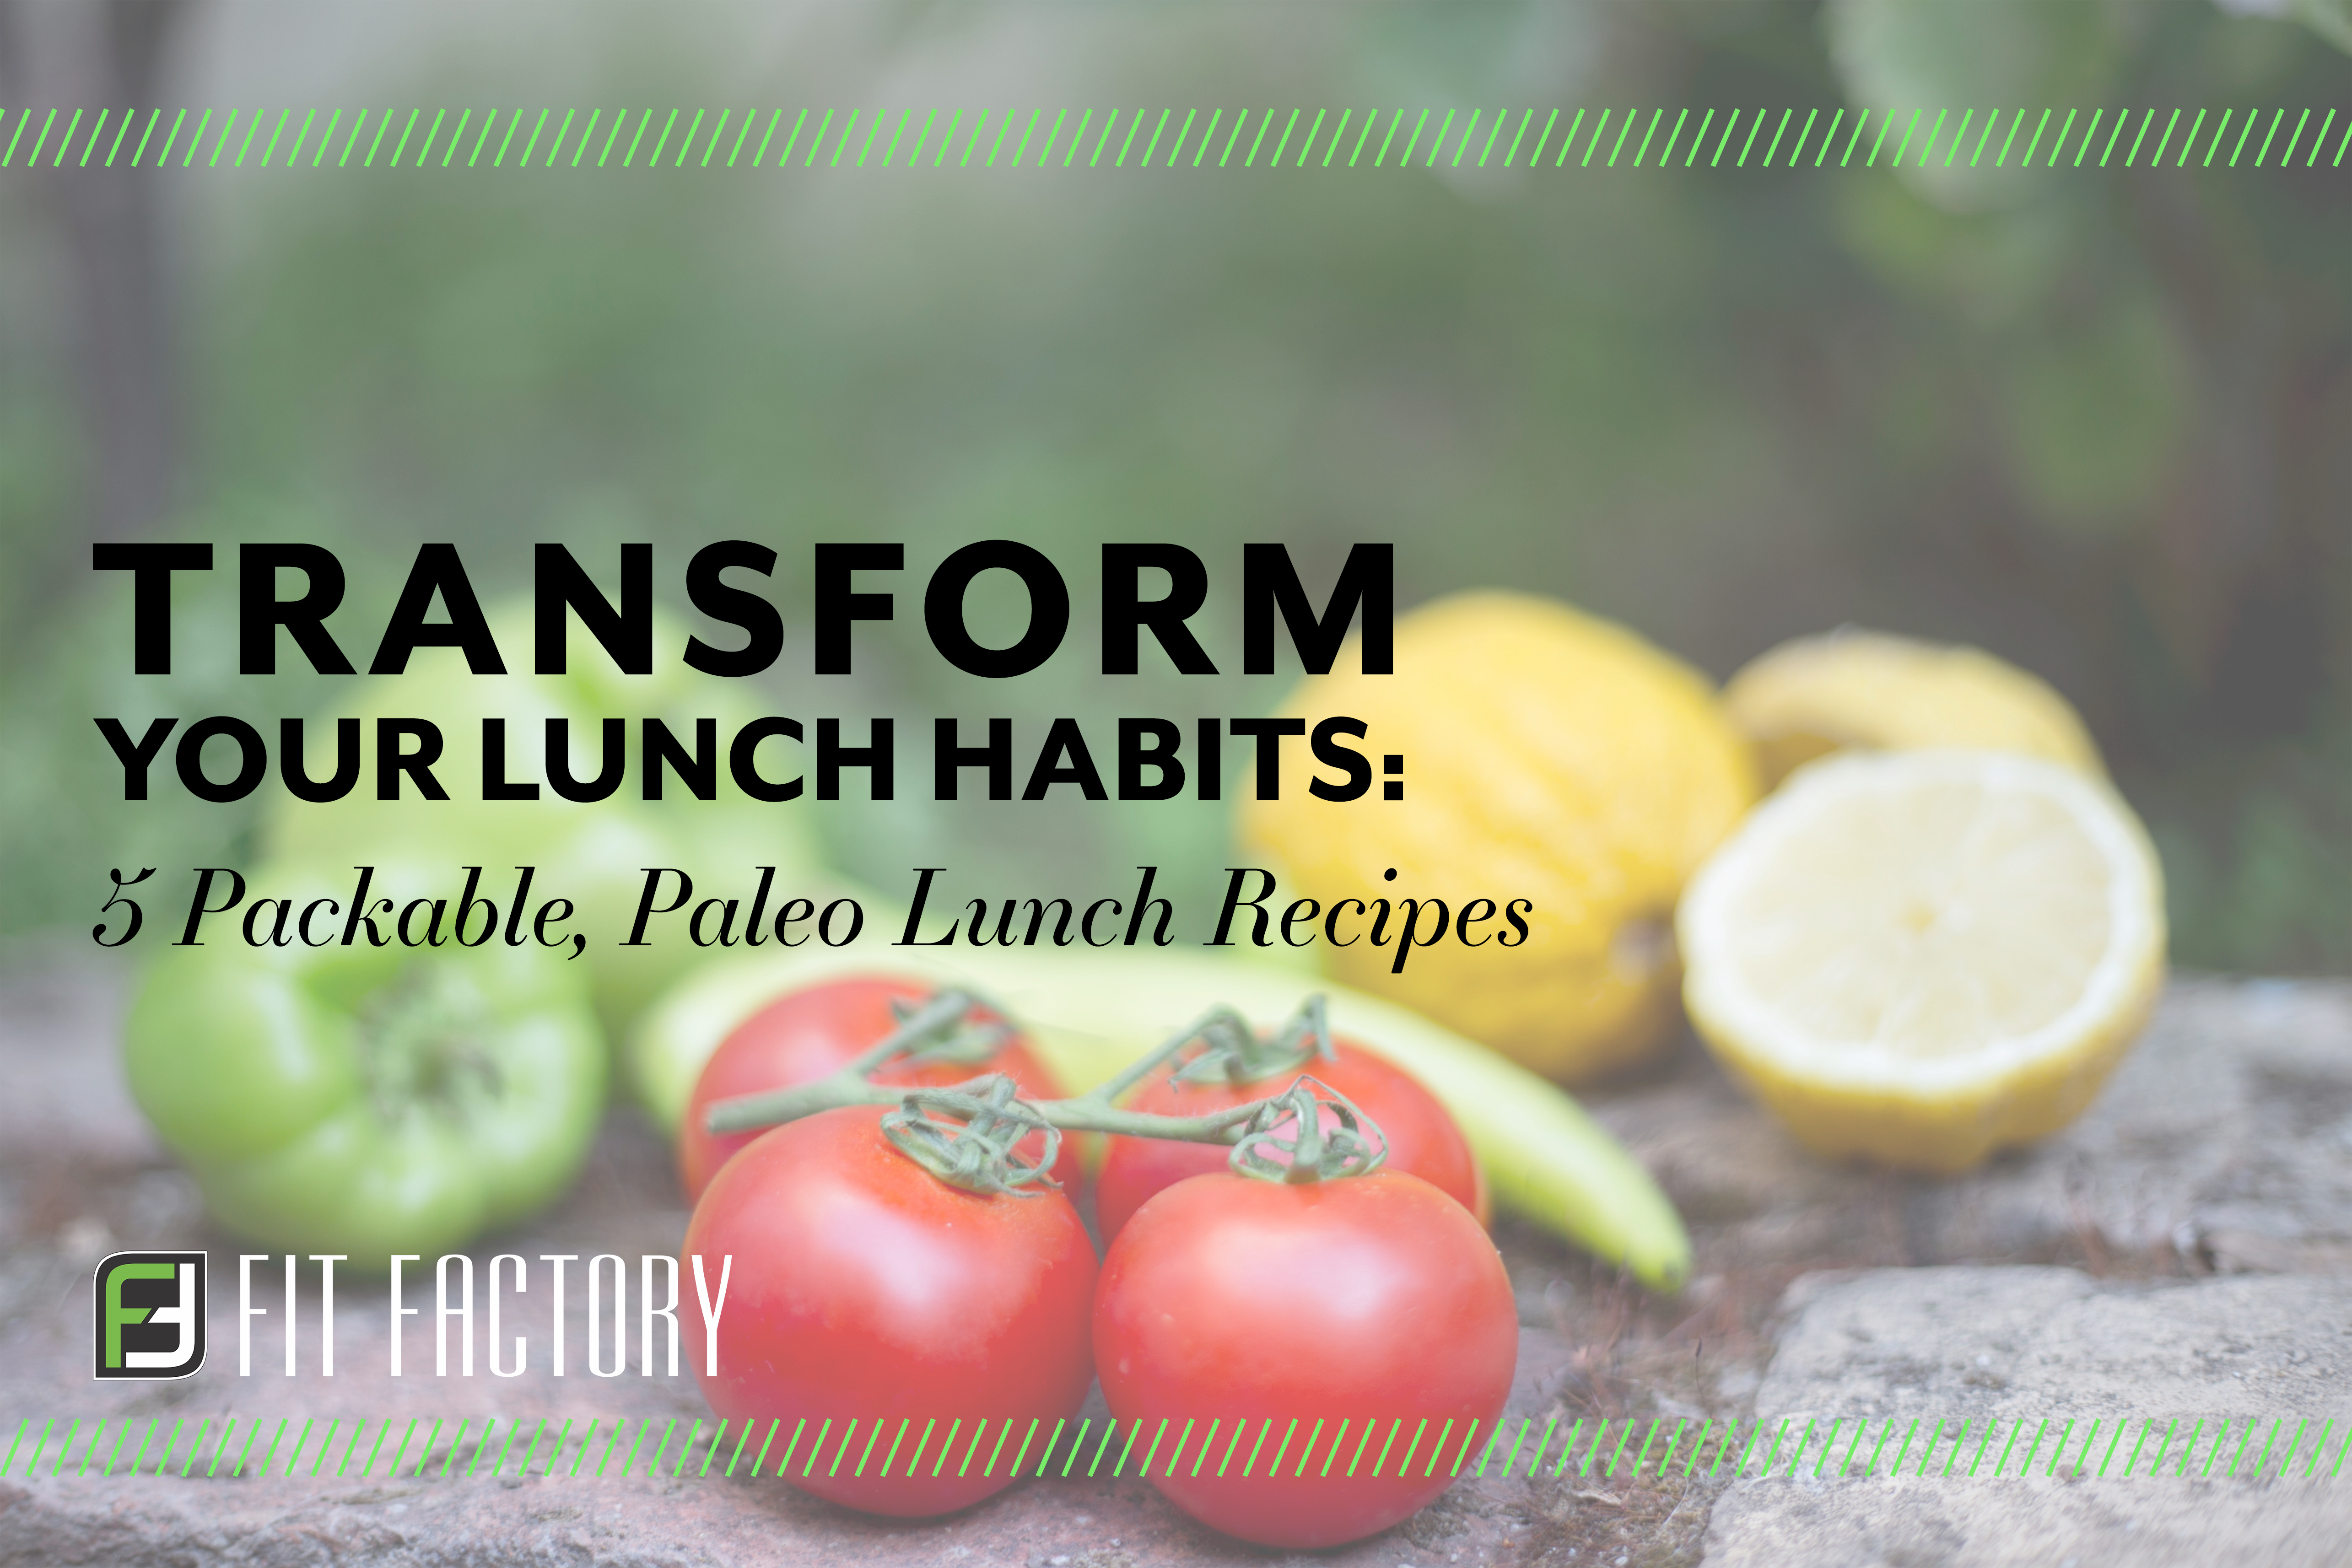 Transform Your Lunch Habits: 5 Packable Paleo Lunch Recipes